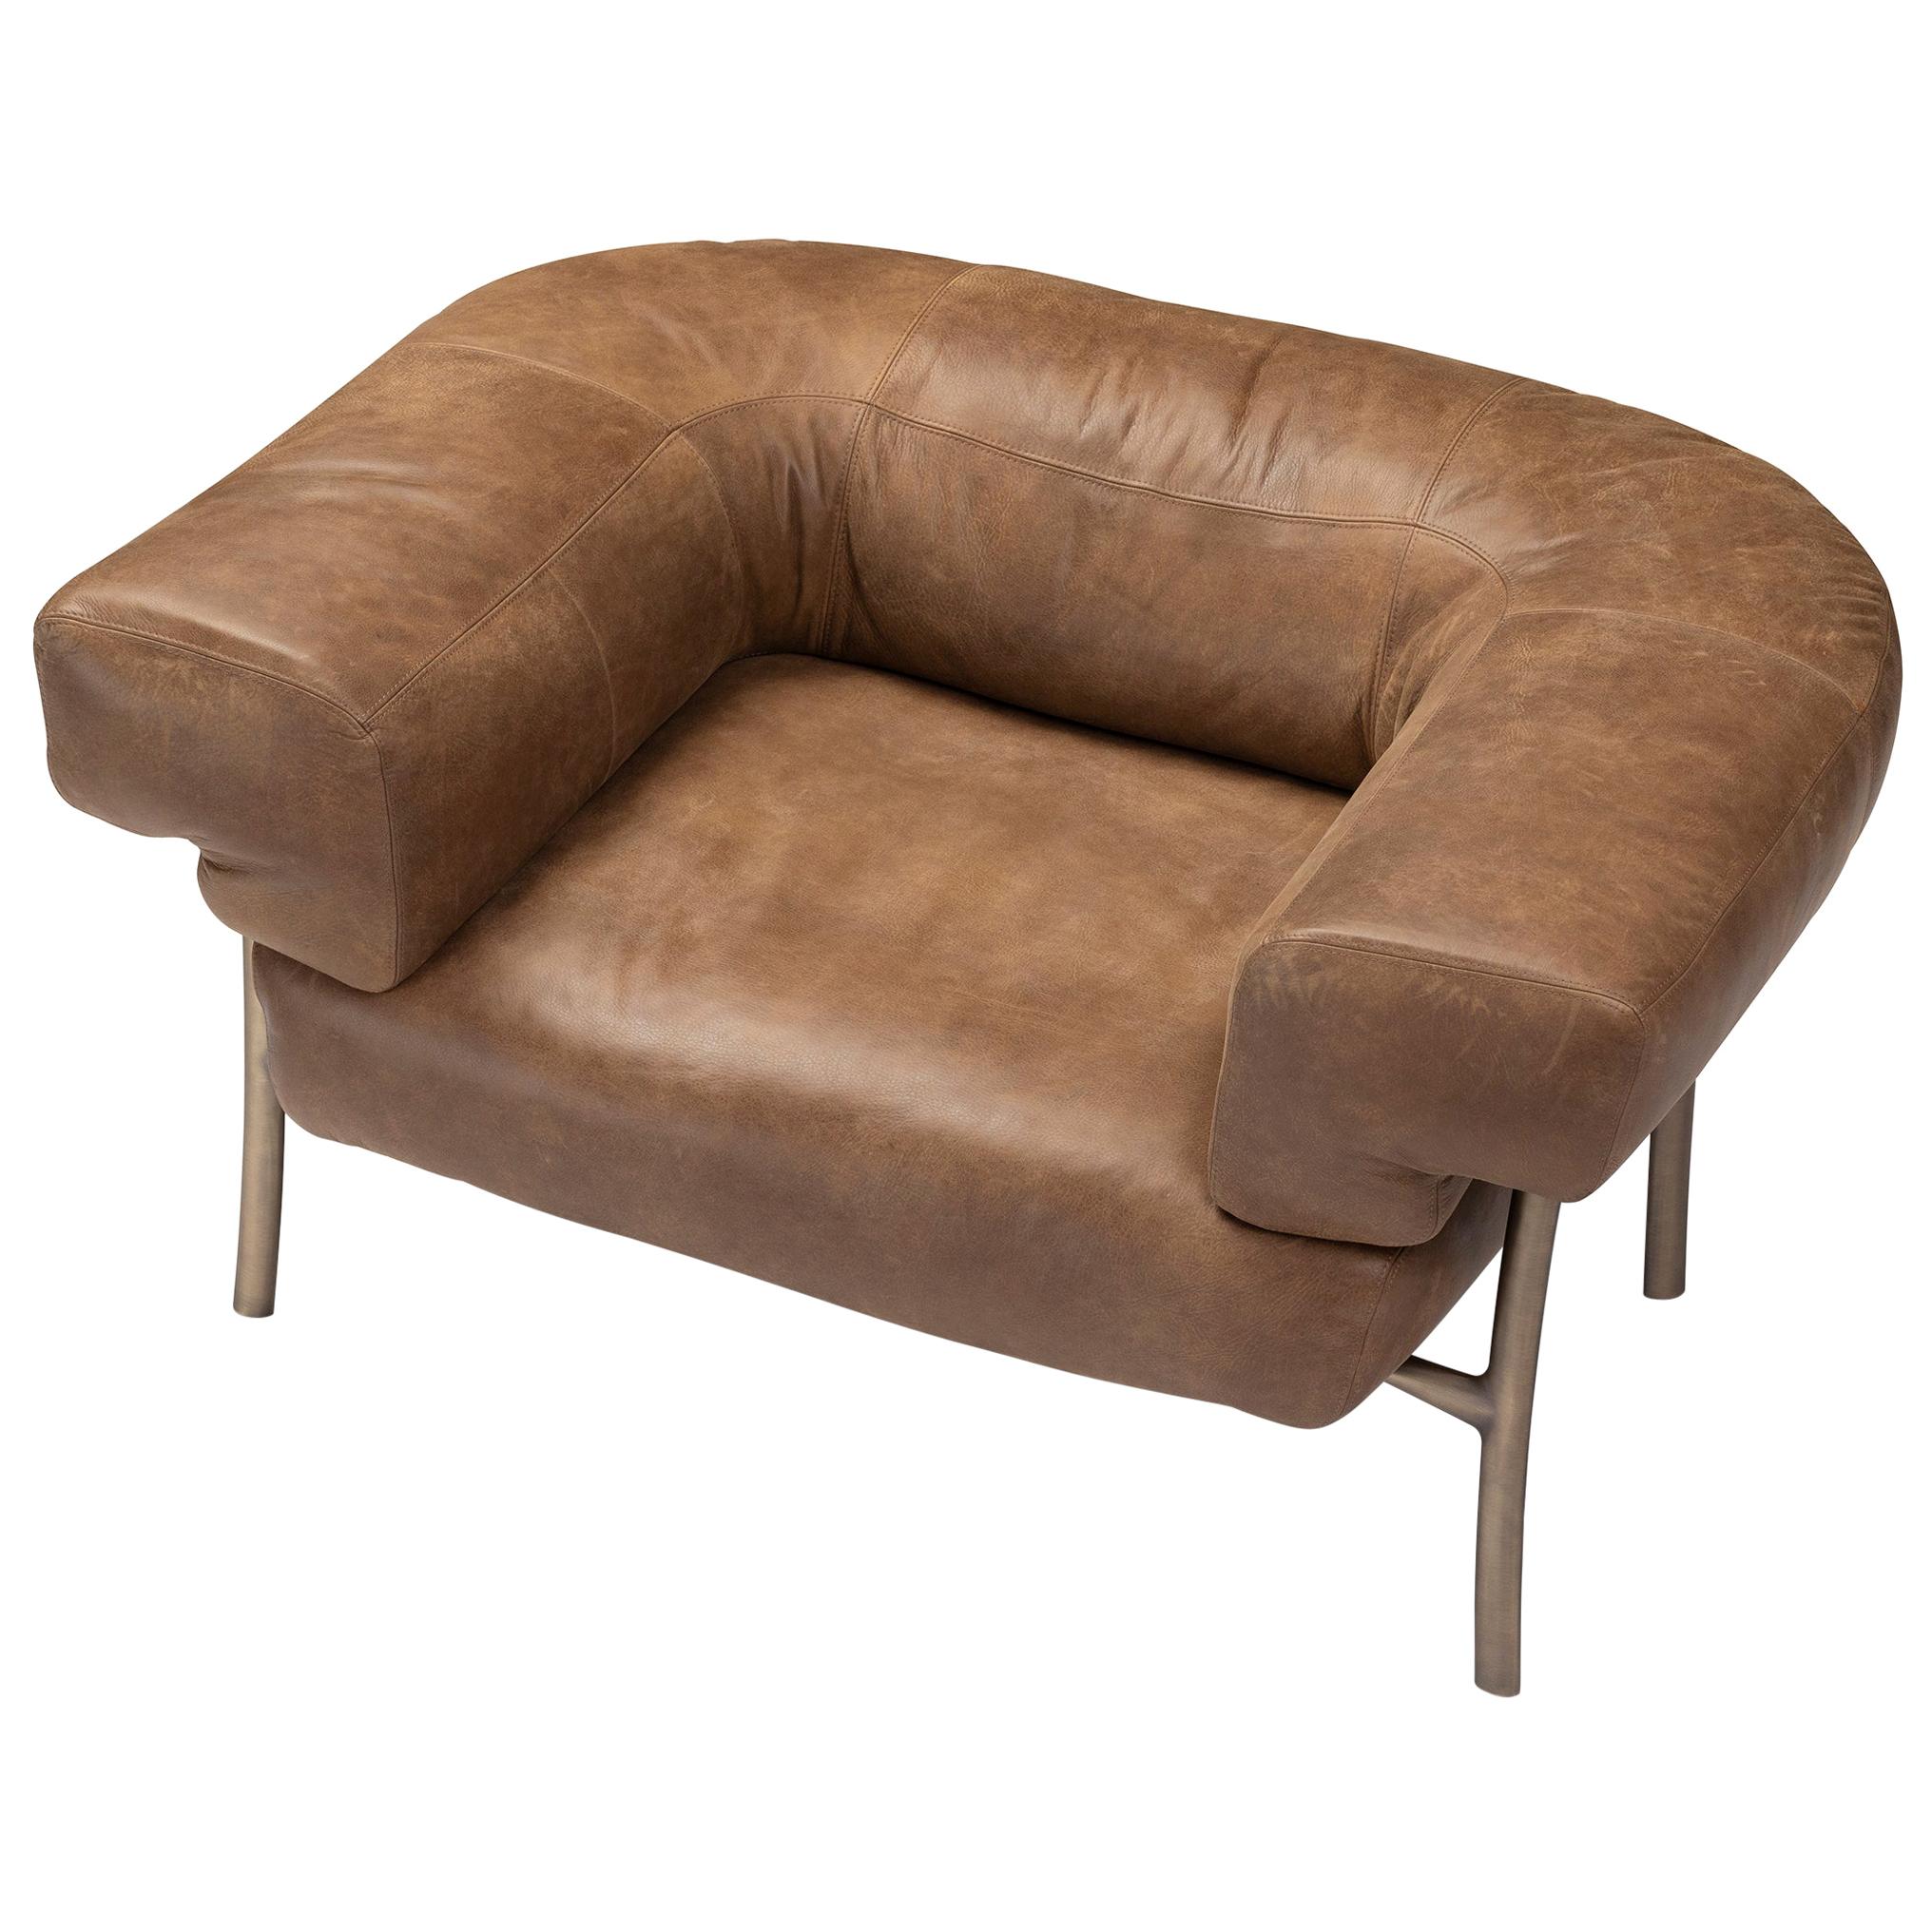 Ghidini 1961 Katana Lounge Chair in Leather and Burnished Brass, Paolo Rizzatto